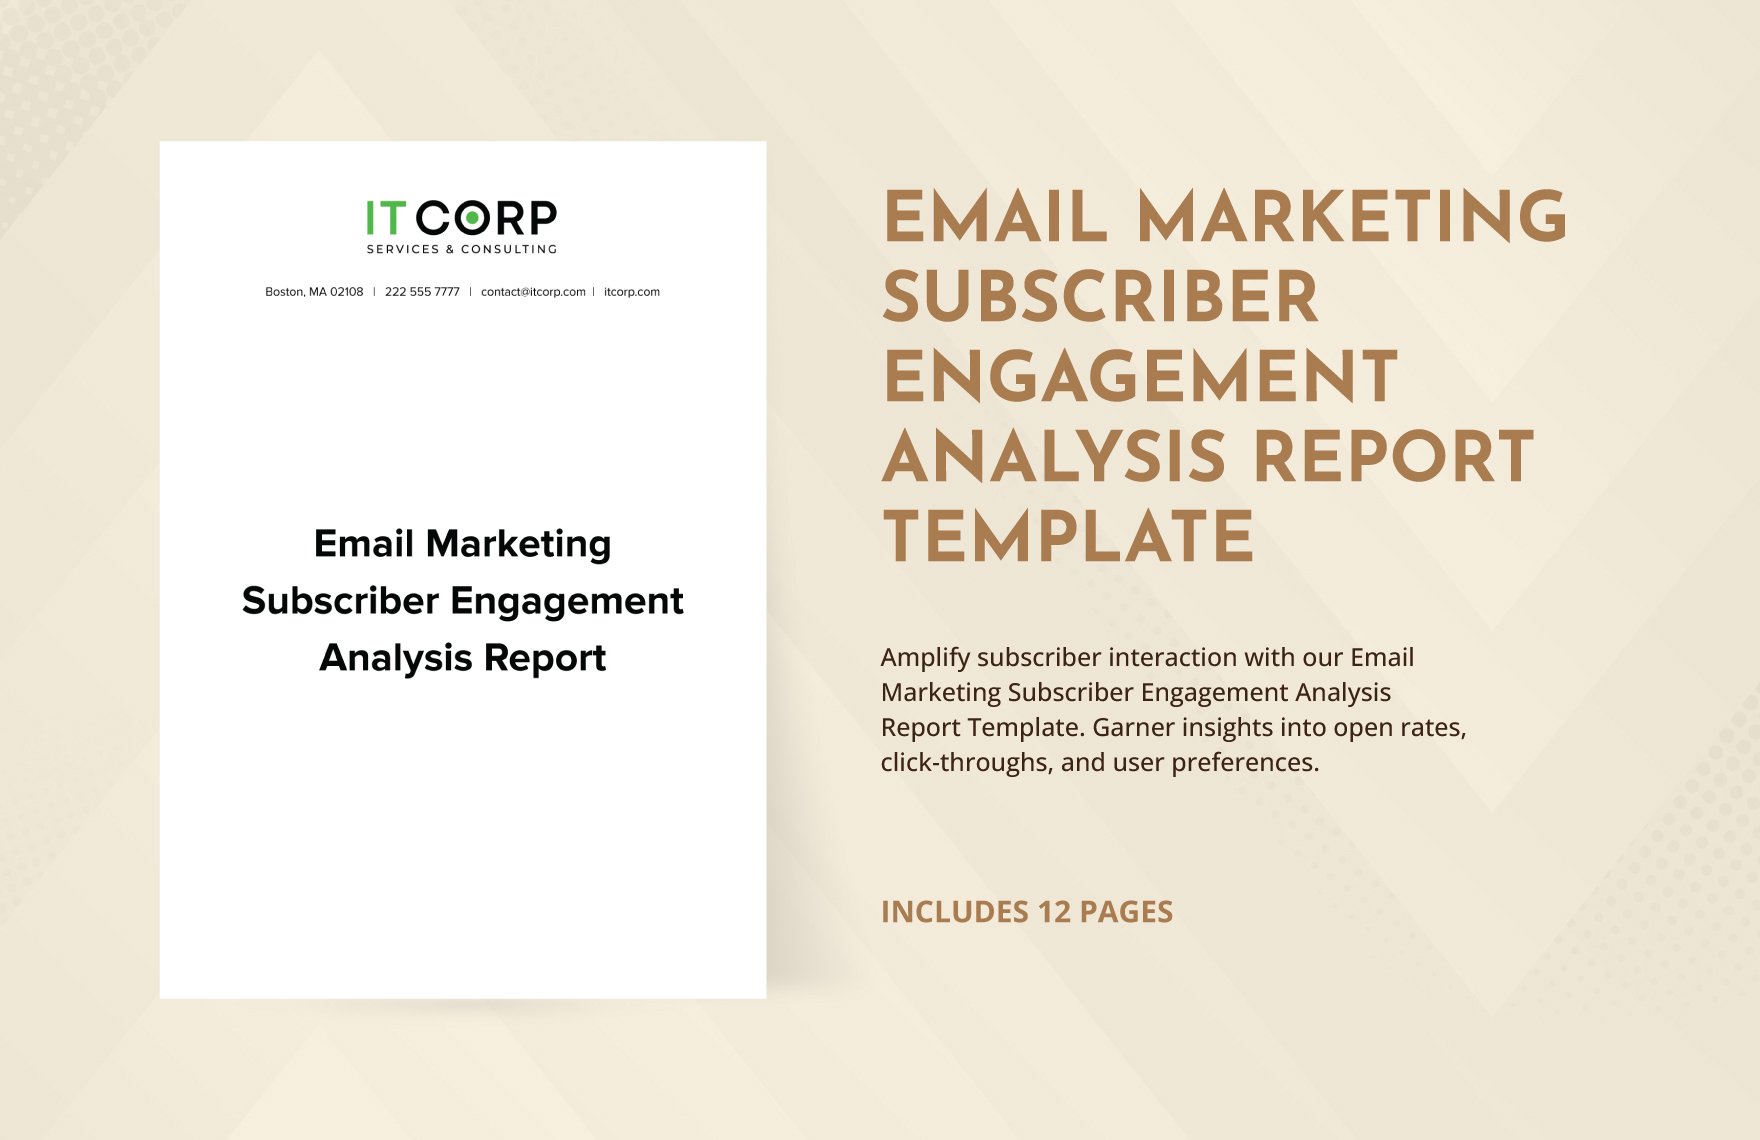 Email Marketing Subscriber Engagement Analysis Report Template in Word, Google Docs, PDF